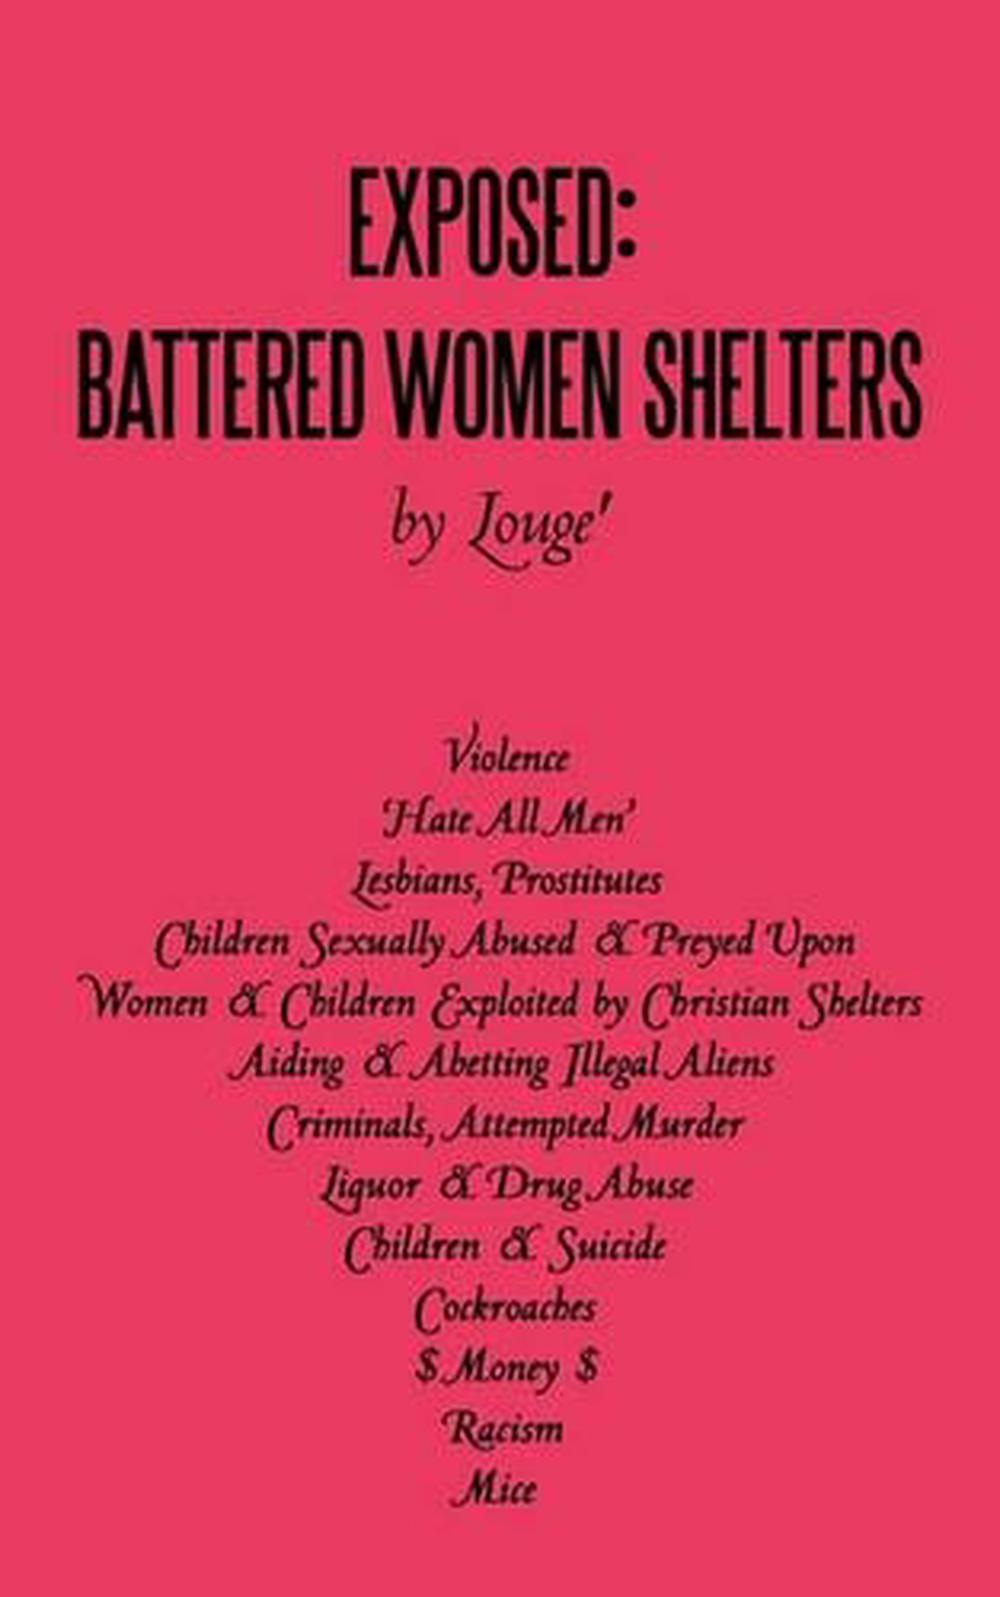 Battered Women Are Exposed And Many Forms